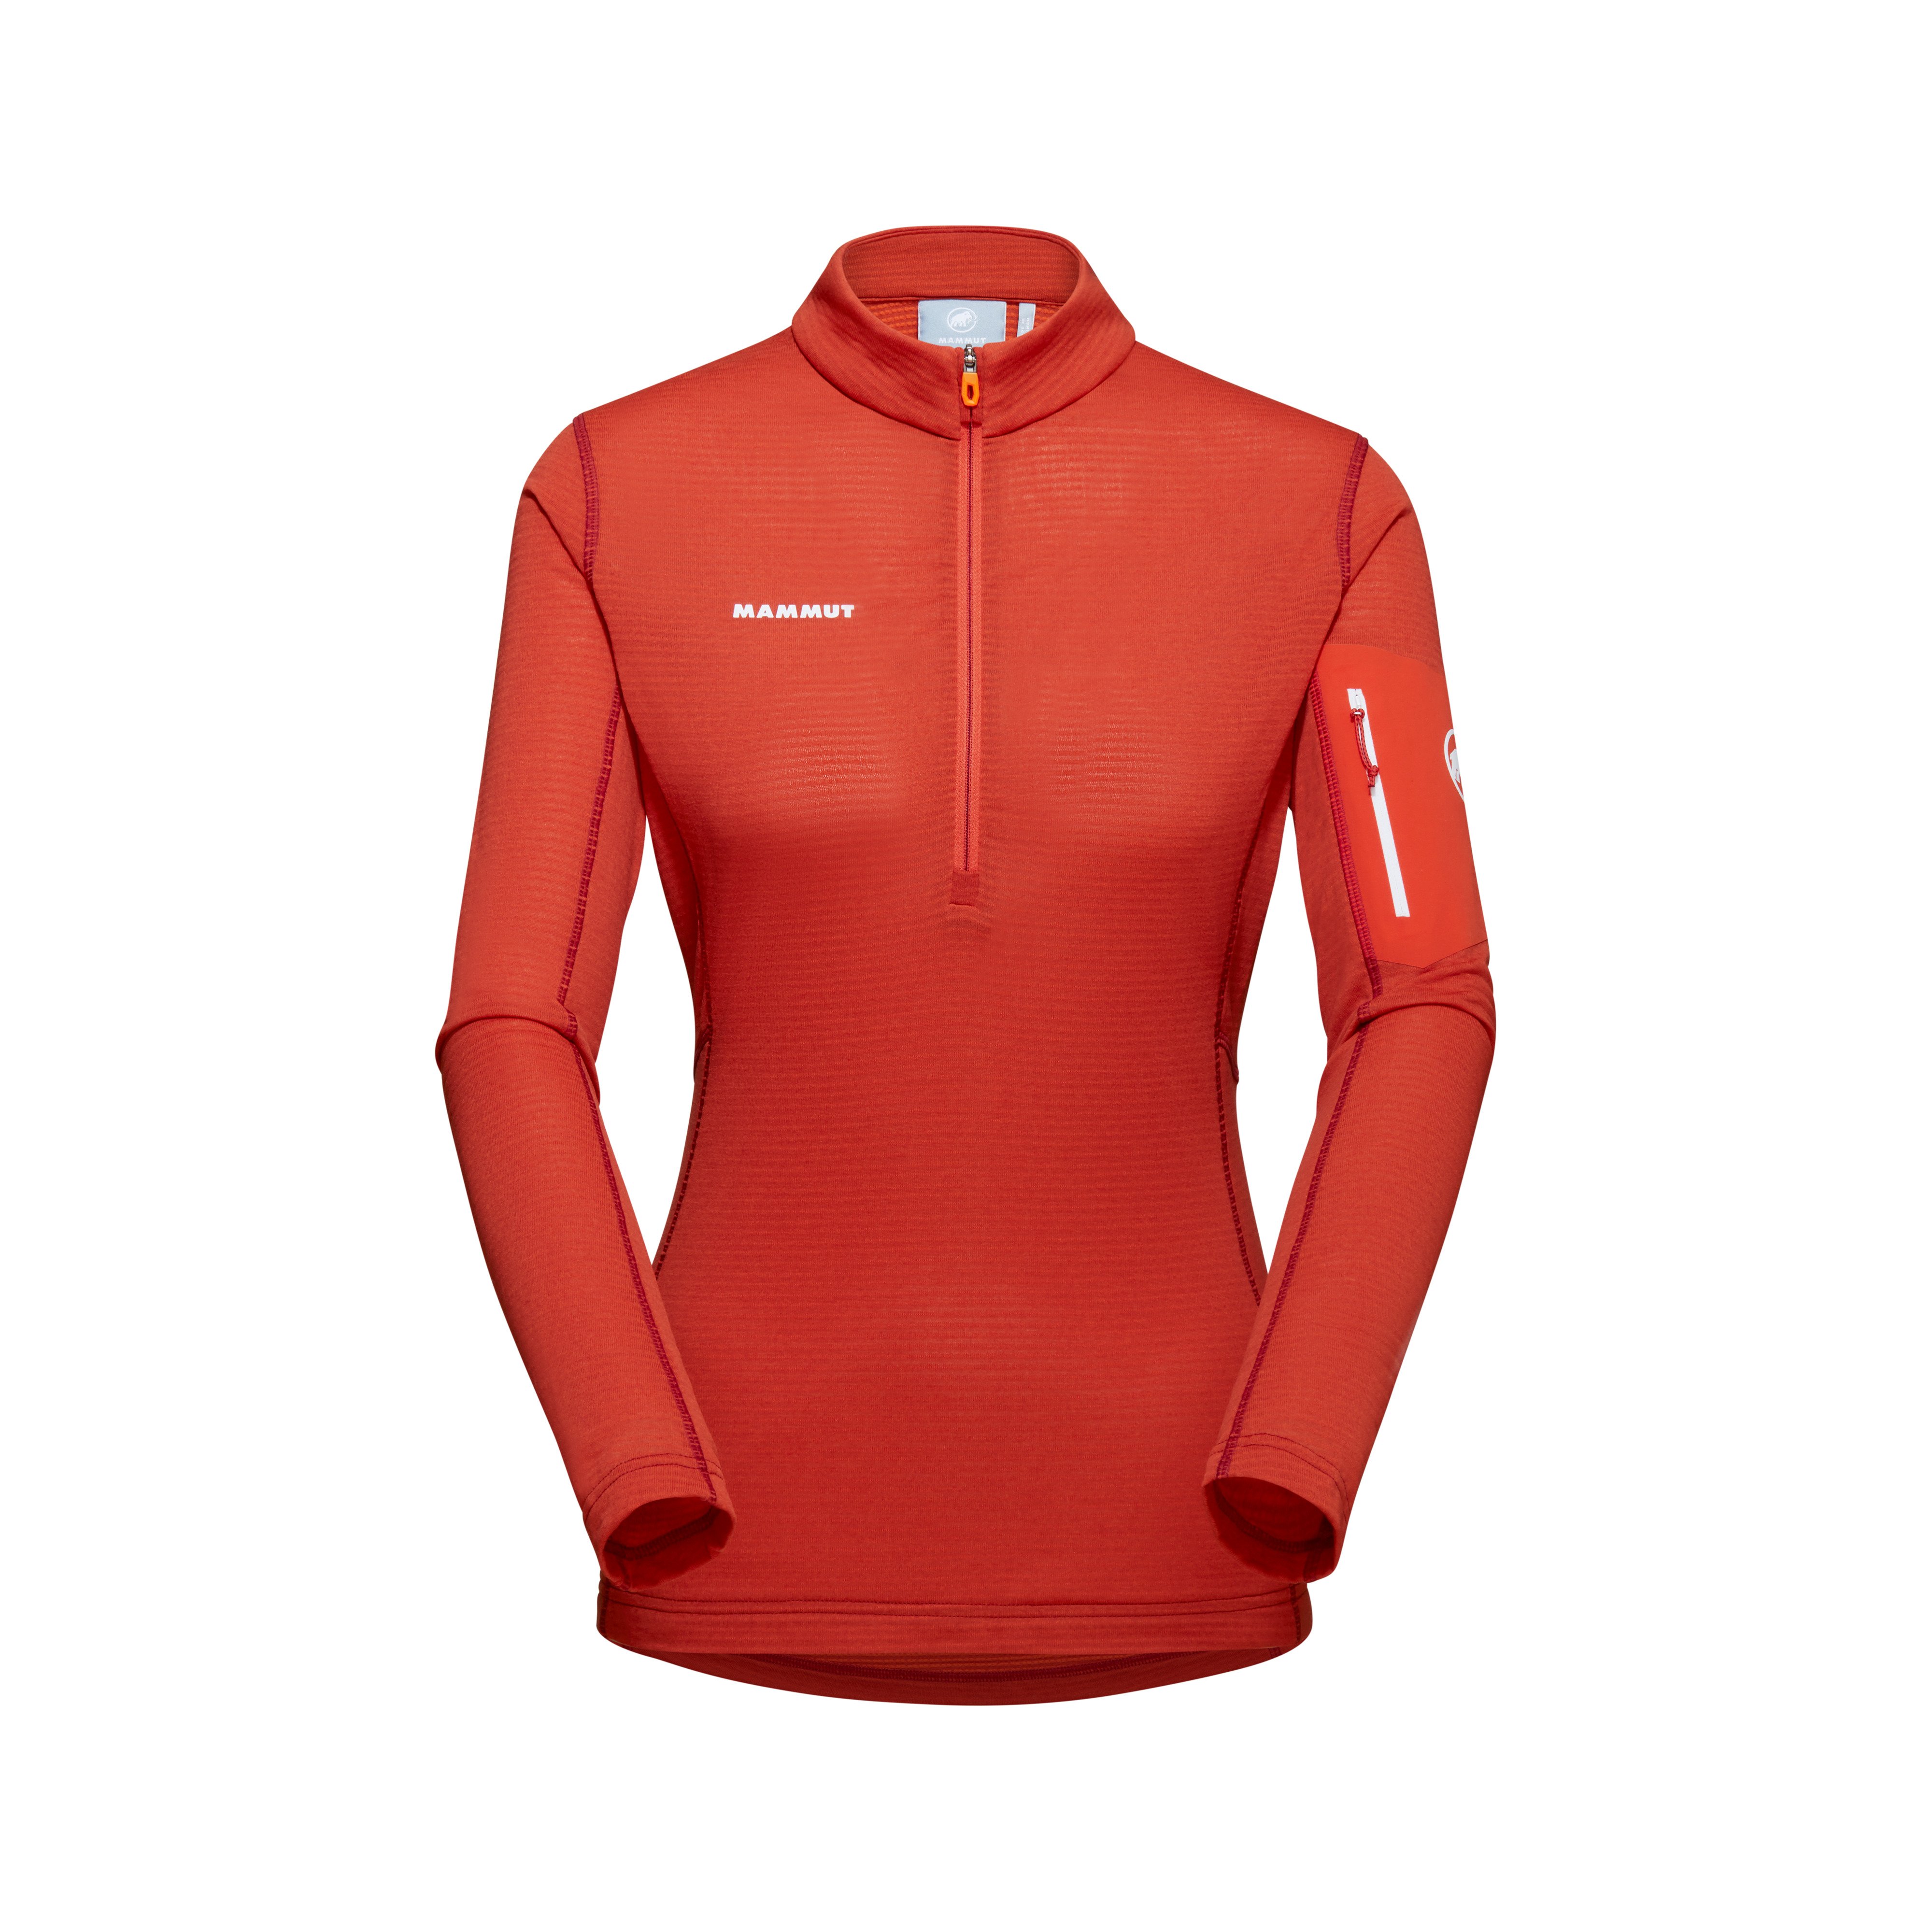 Aenergy Light ML Half Zip Pull Women - hot red-blood red, XL product image